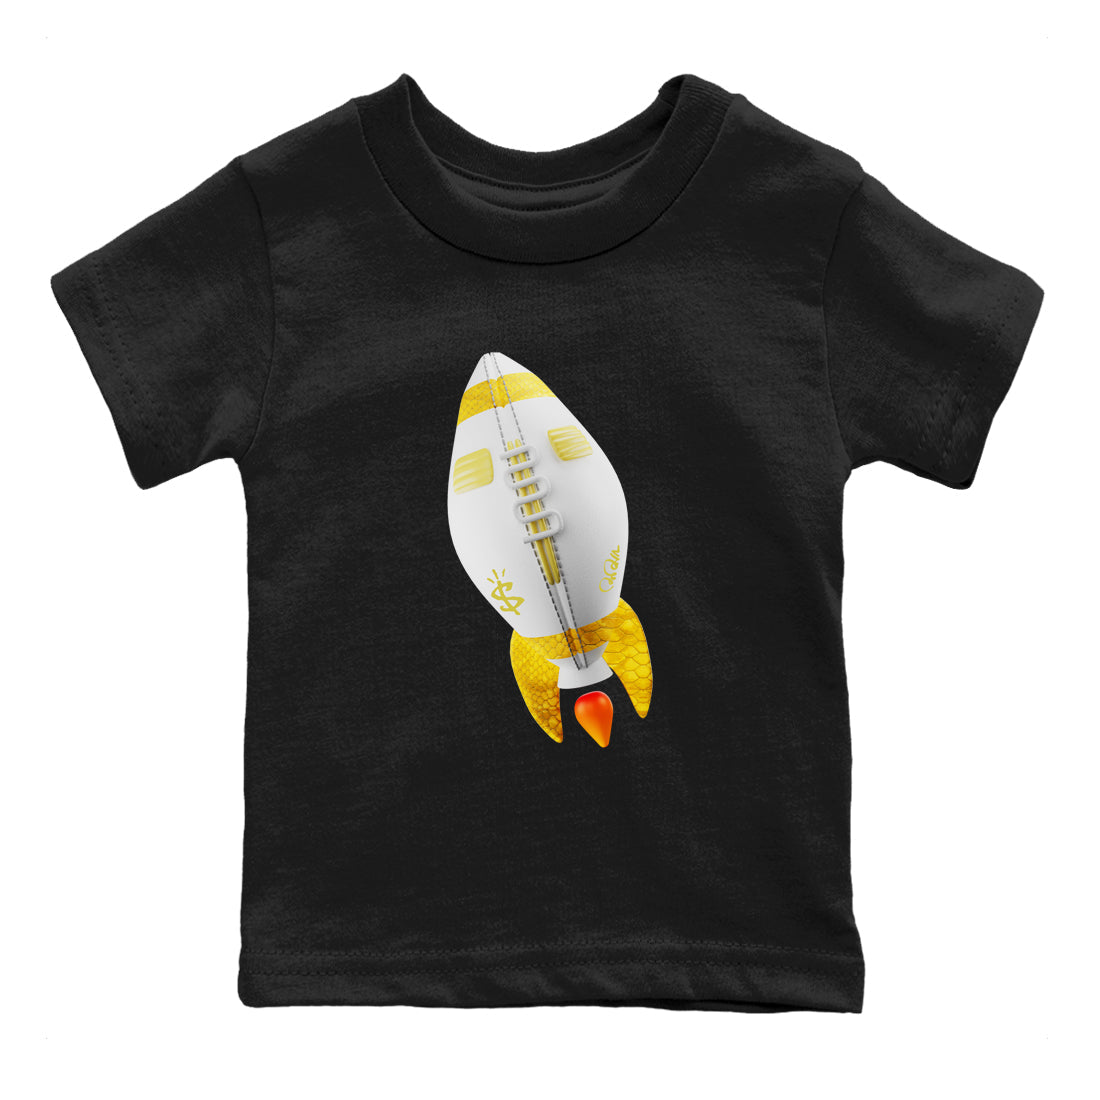 Air Jordan 11 Yellow Python Rugby Rocket Baby and Kids Shirts Air Jordan 11 Yellow Python Kids Shirts Washing and Care Tip